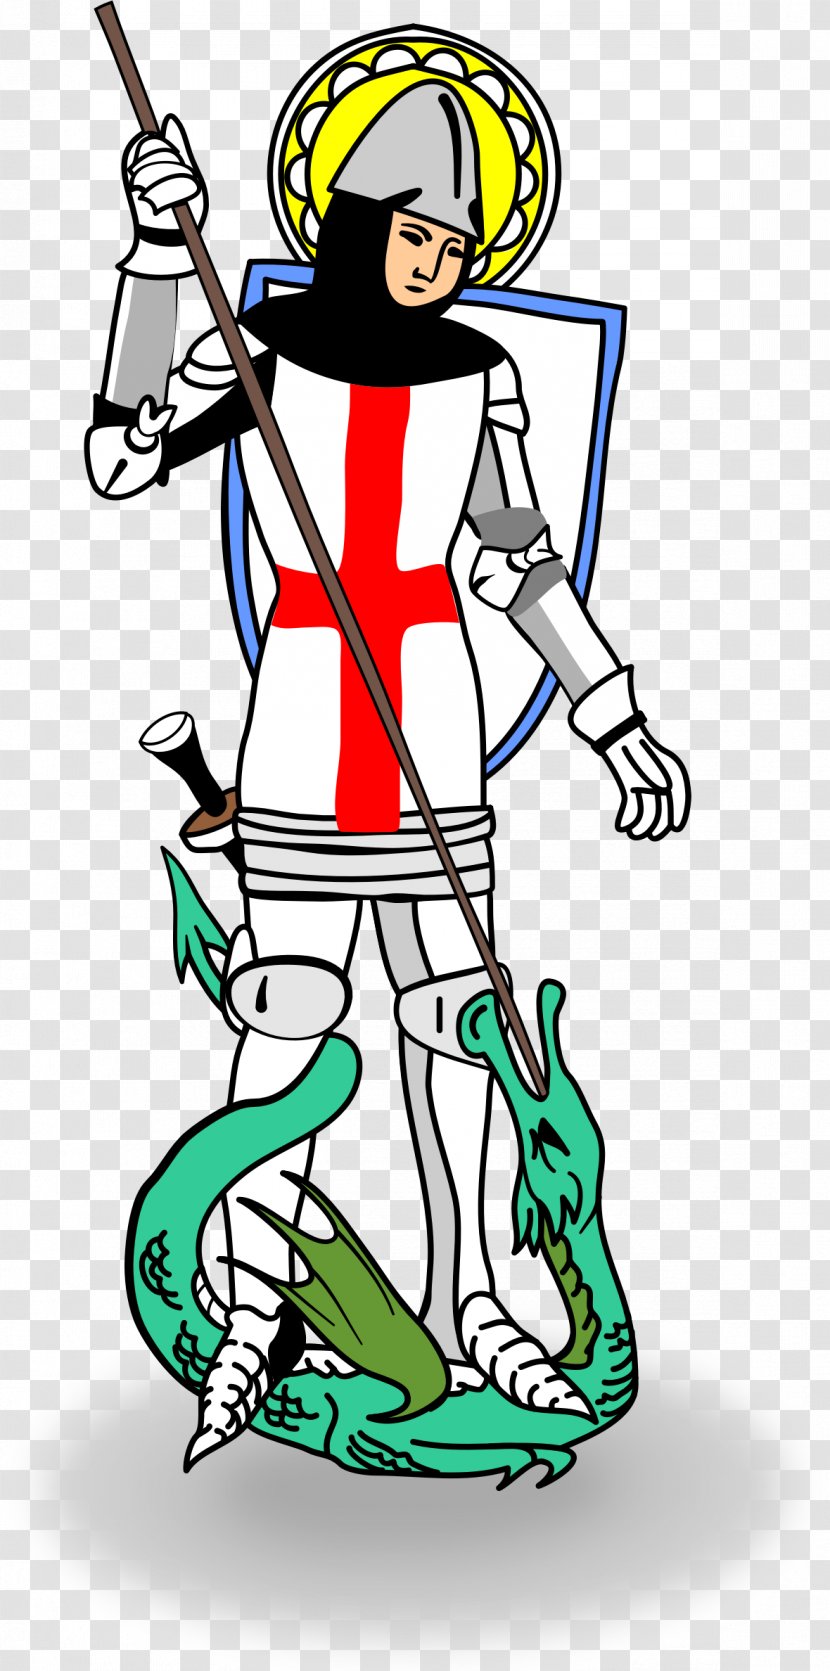 Saint George And The Dragon Clip Art - Ribbon Of - Fashion Accessory Transparent PNG